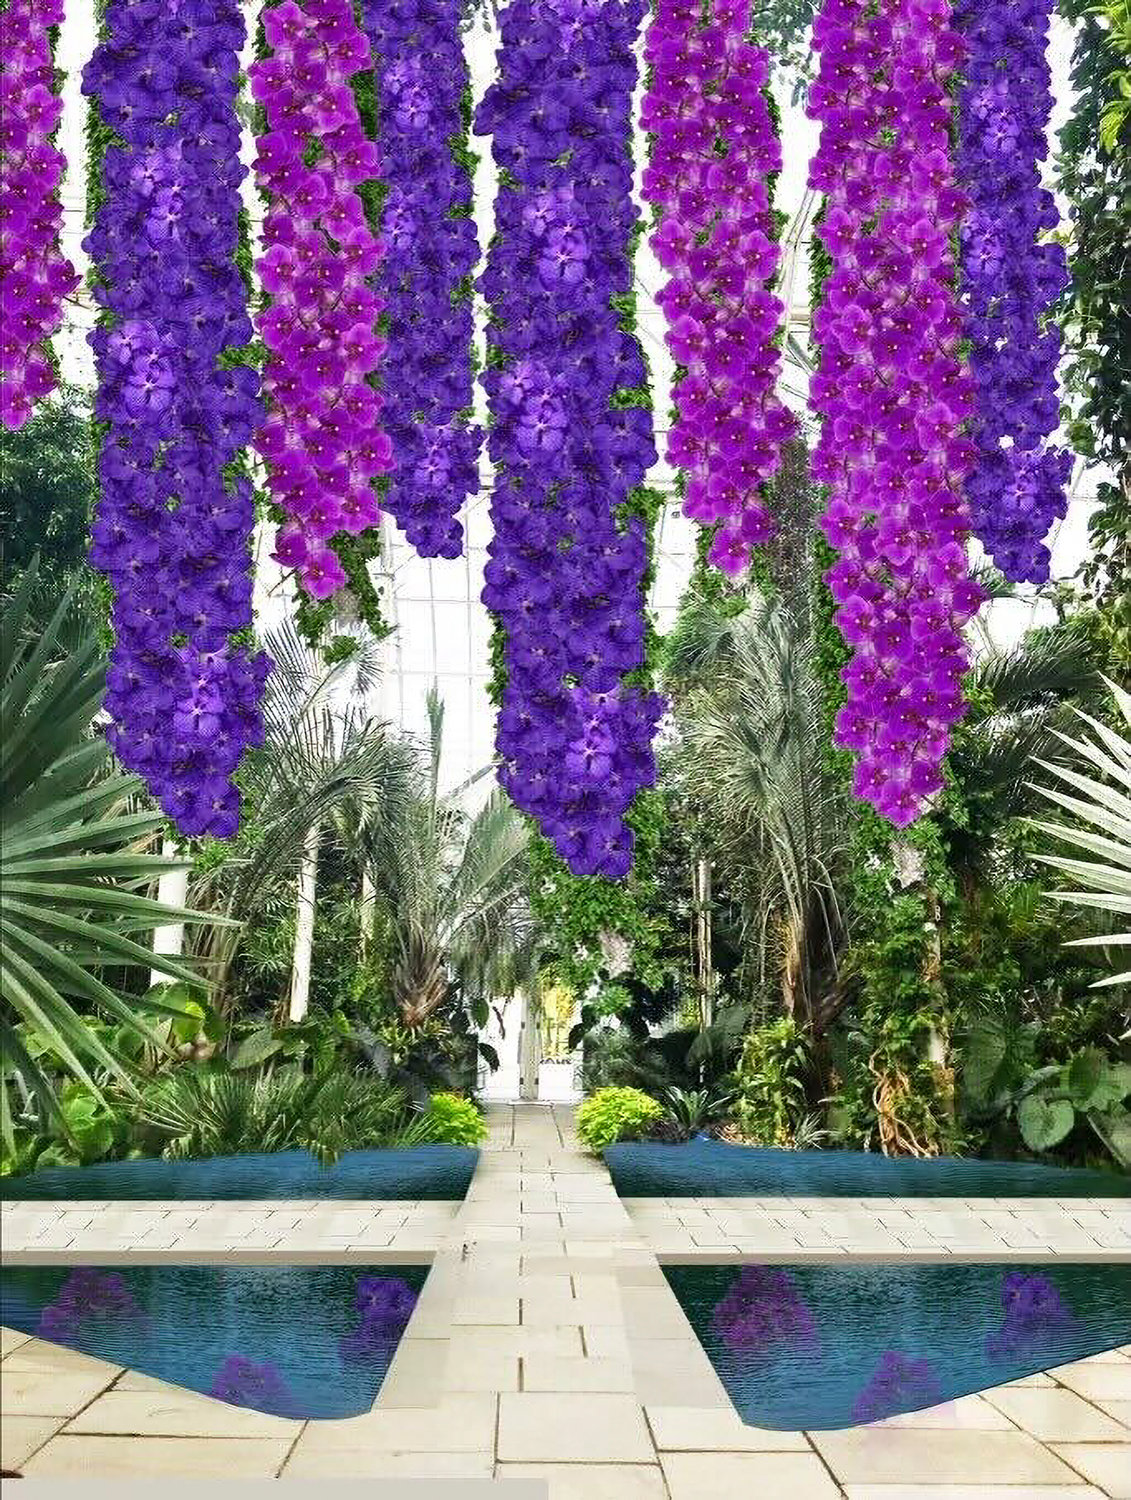 Jeff Leatham is taking another shot at designing an orchid show for the New York Botanical Garden after his previous exhibit was shut down by the coronavirus pandemic. He has promised to bring back plenty of color in this year’s display — which opens Feb. 26 — including some of his favorite purple and pink.